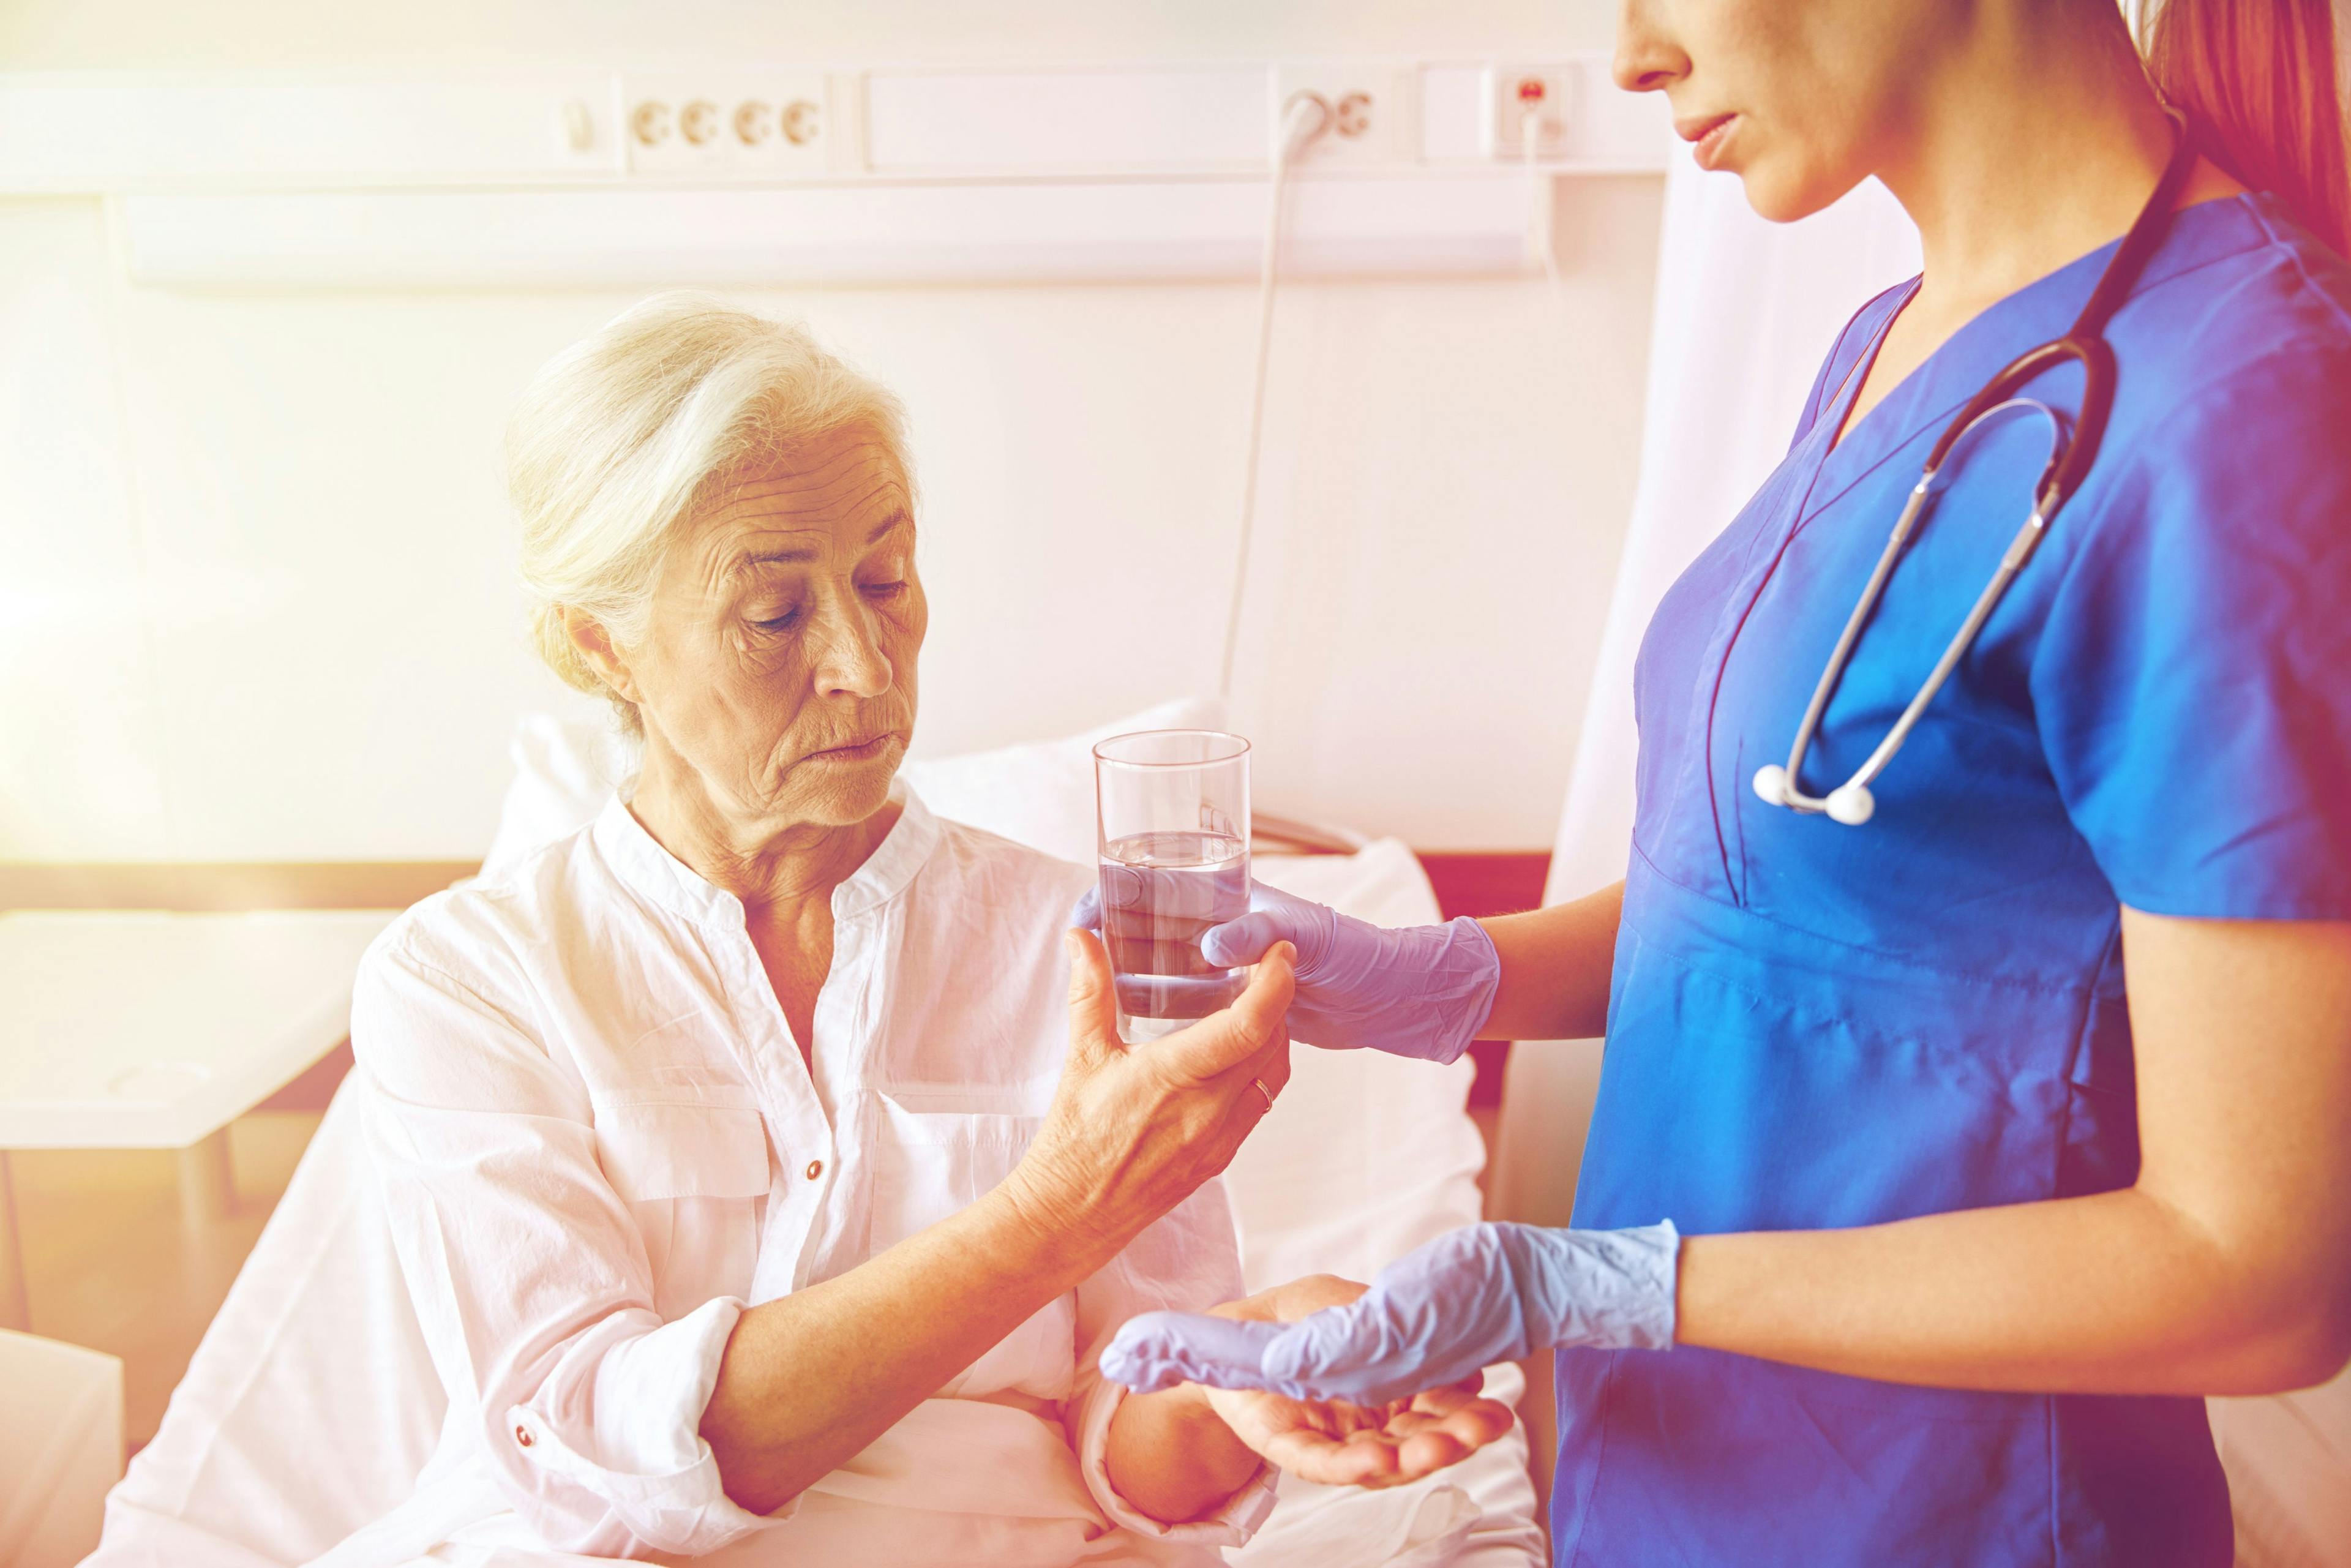 Image of a patient with cancer receiving pills from a nurse.